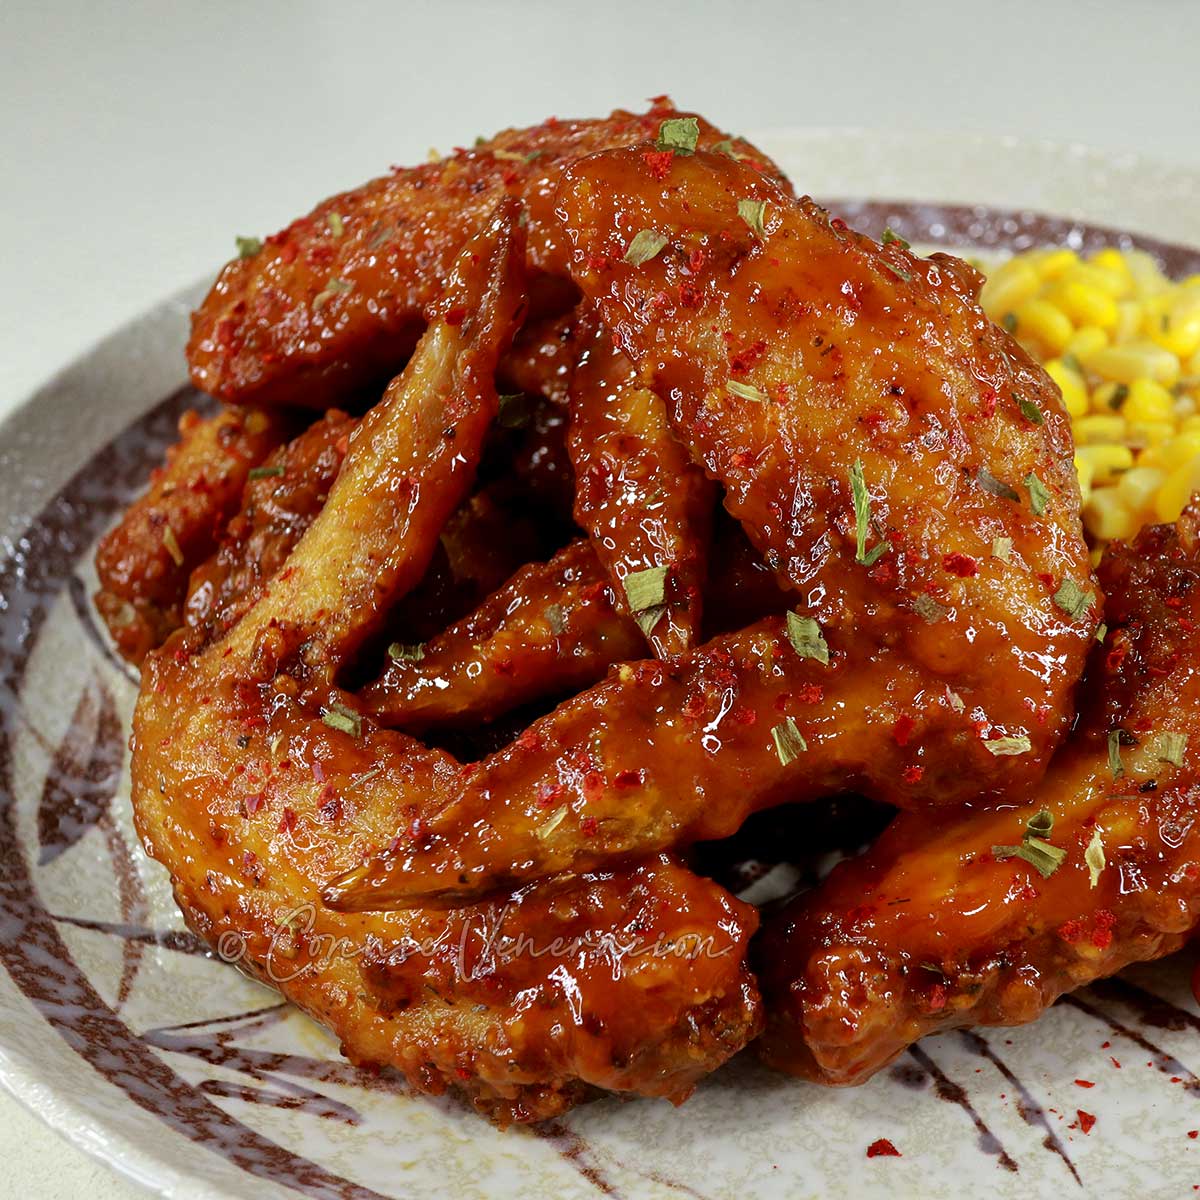 Cajun fried chicken wings with sweet corn on the side